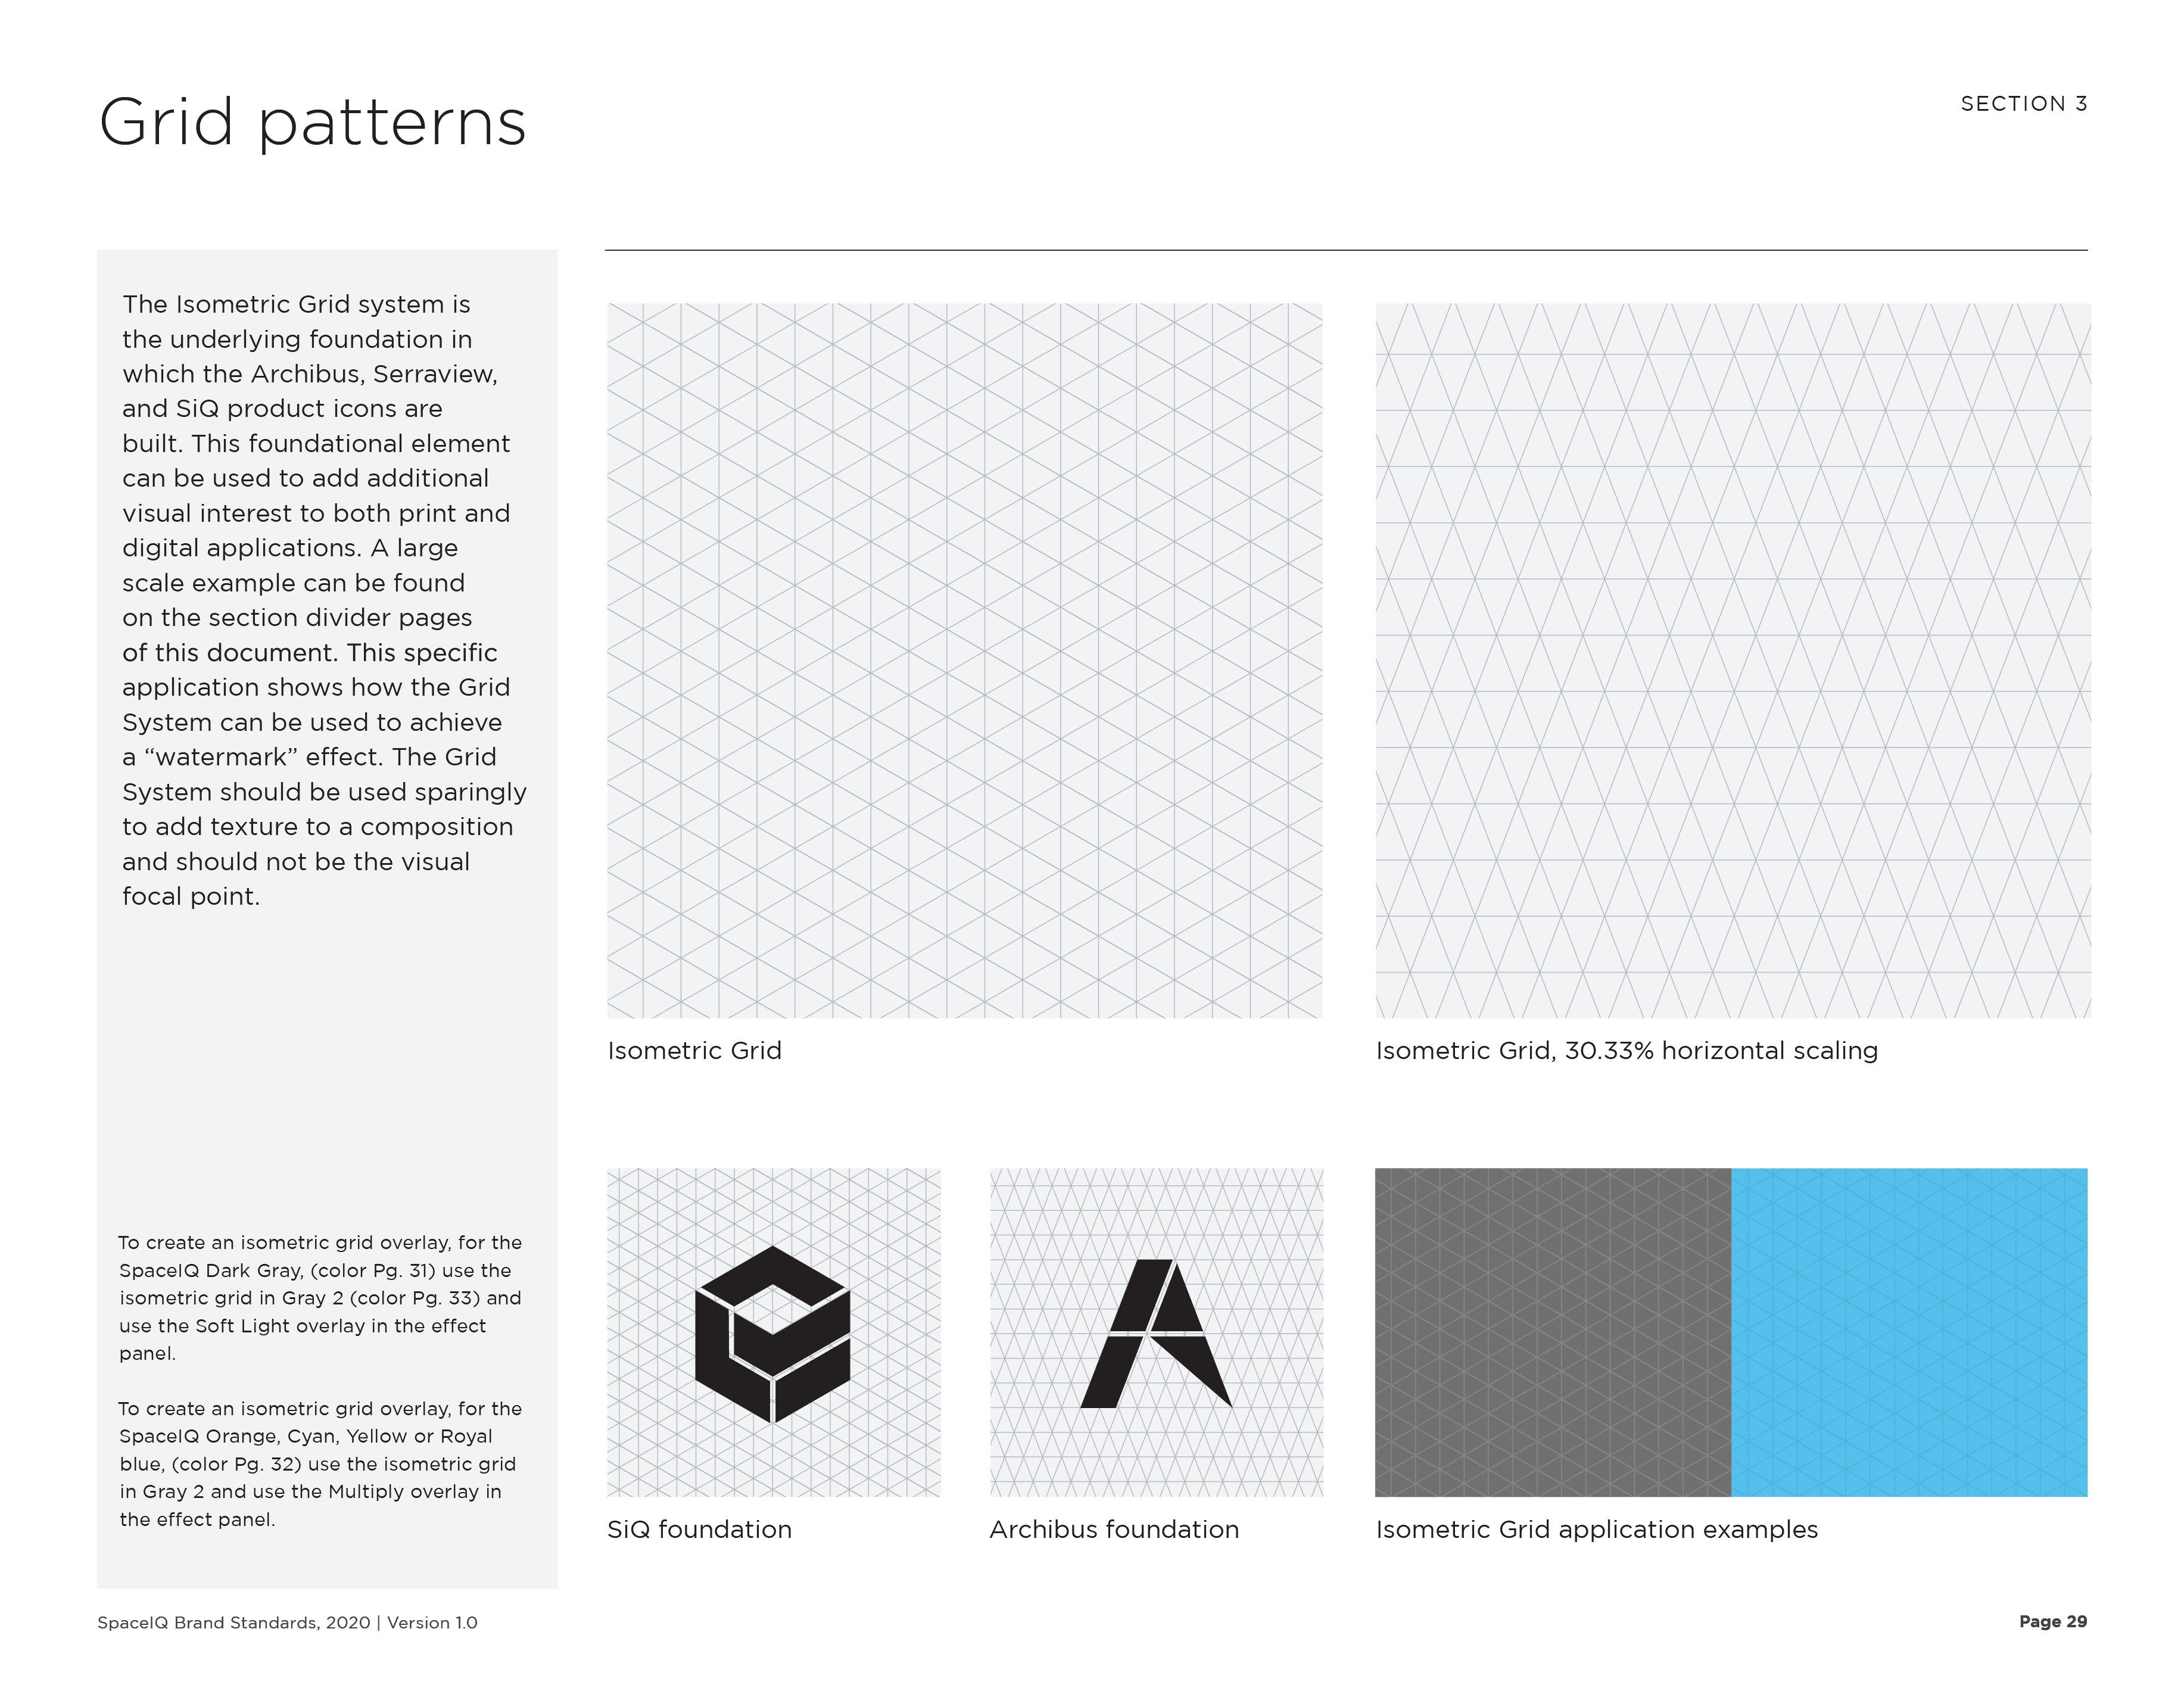 SpaceIQ Brand Guidelines Grid patterns